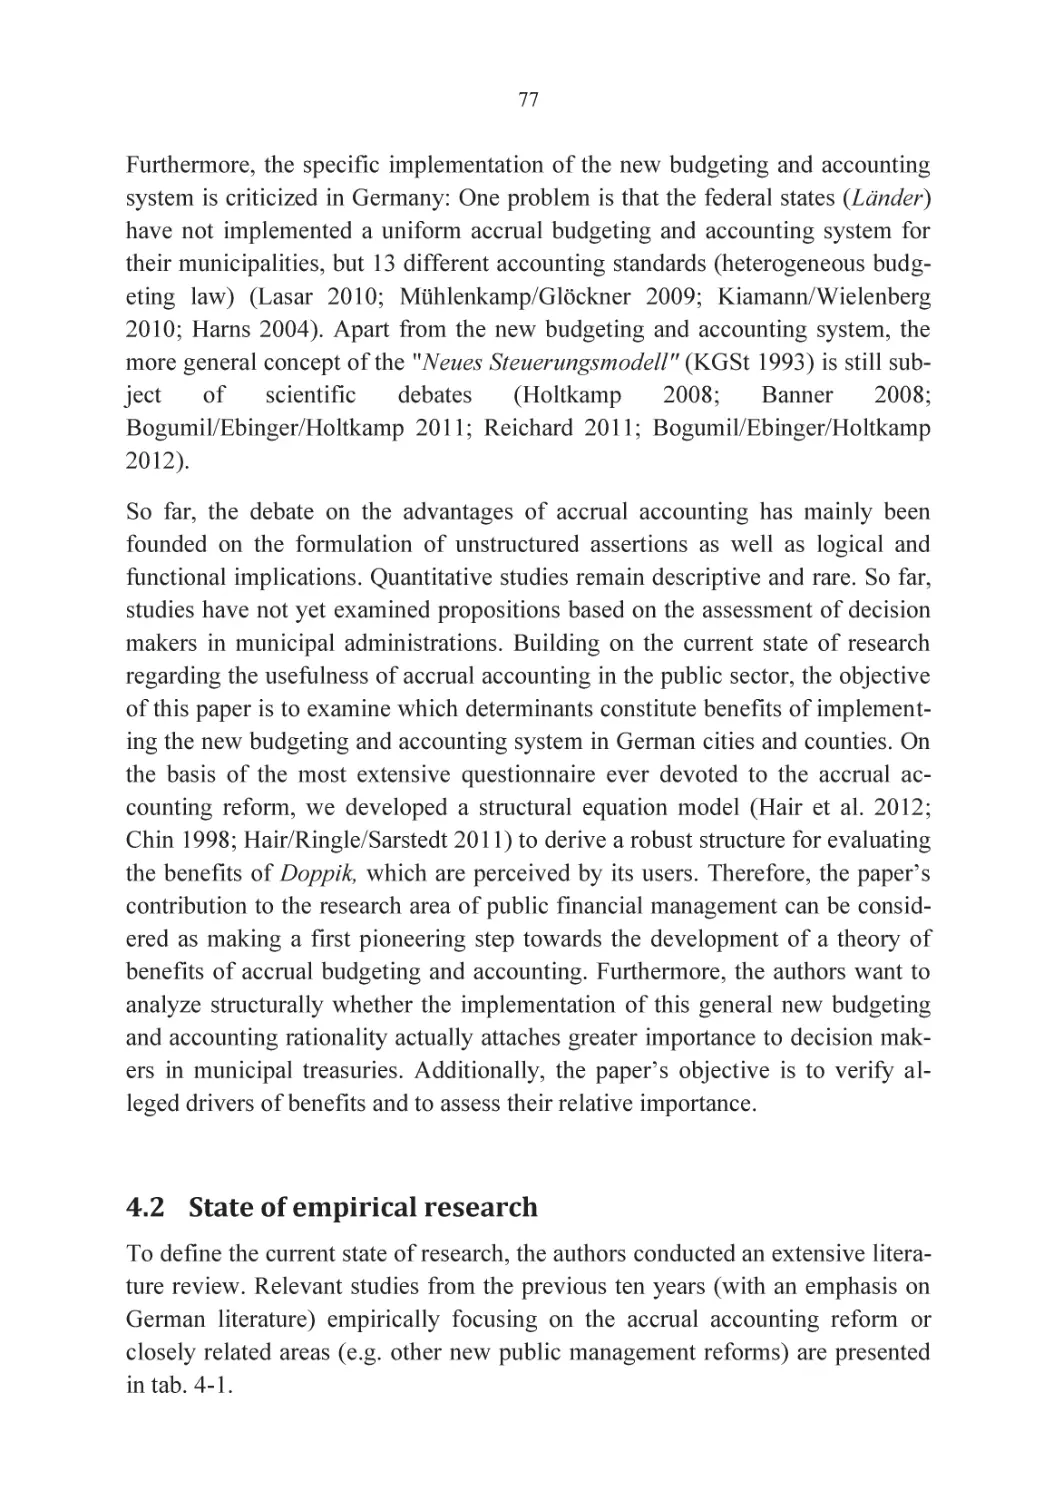 4.2 State of empirical research